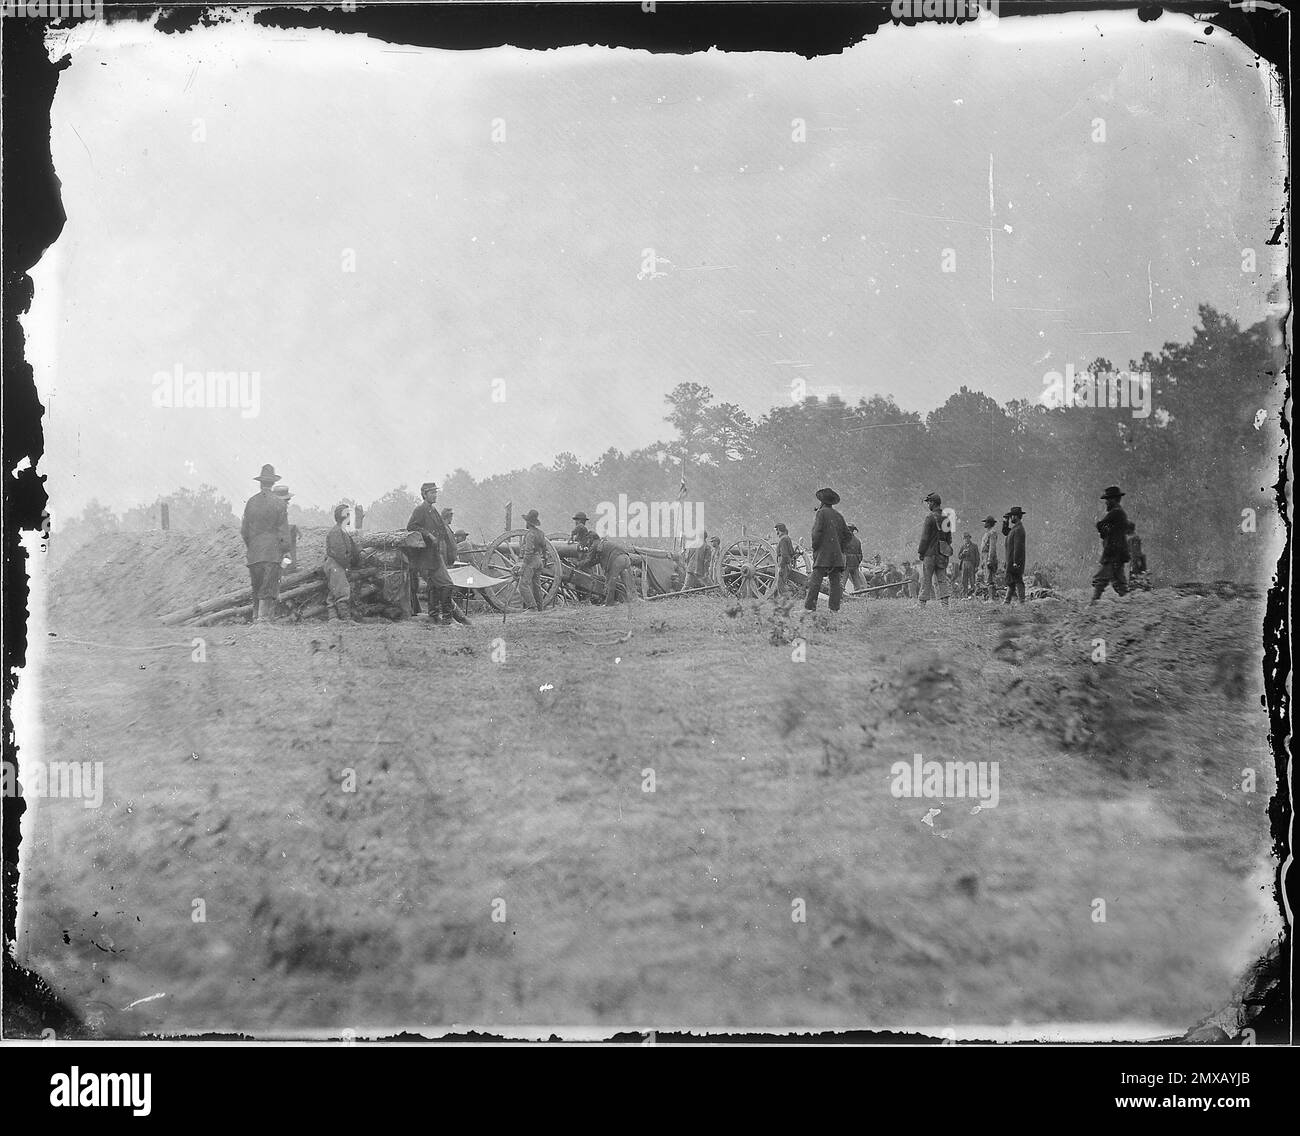 The Battle of Seven Pines (also known as the Battle of Fair Oaks or Fair Oaks Station) took place on May 31 and June 1, 1862, in Henrico County, Virginia as part of the Peninsula Campaign of the American Civil War. It was the culmination of an offensive up the Virginia Peninsula led by Union Major General George McClellan, in which the Army of the Potomac reached the outskirts of Richmond. This photo shows Captain Benson's battery behind earthworks. Stock Photo